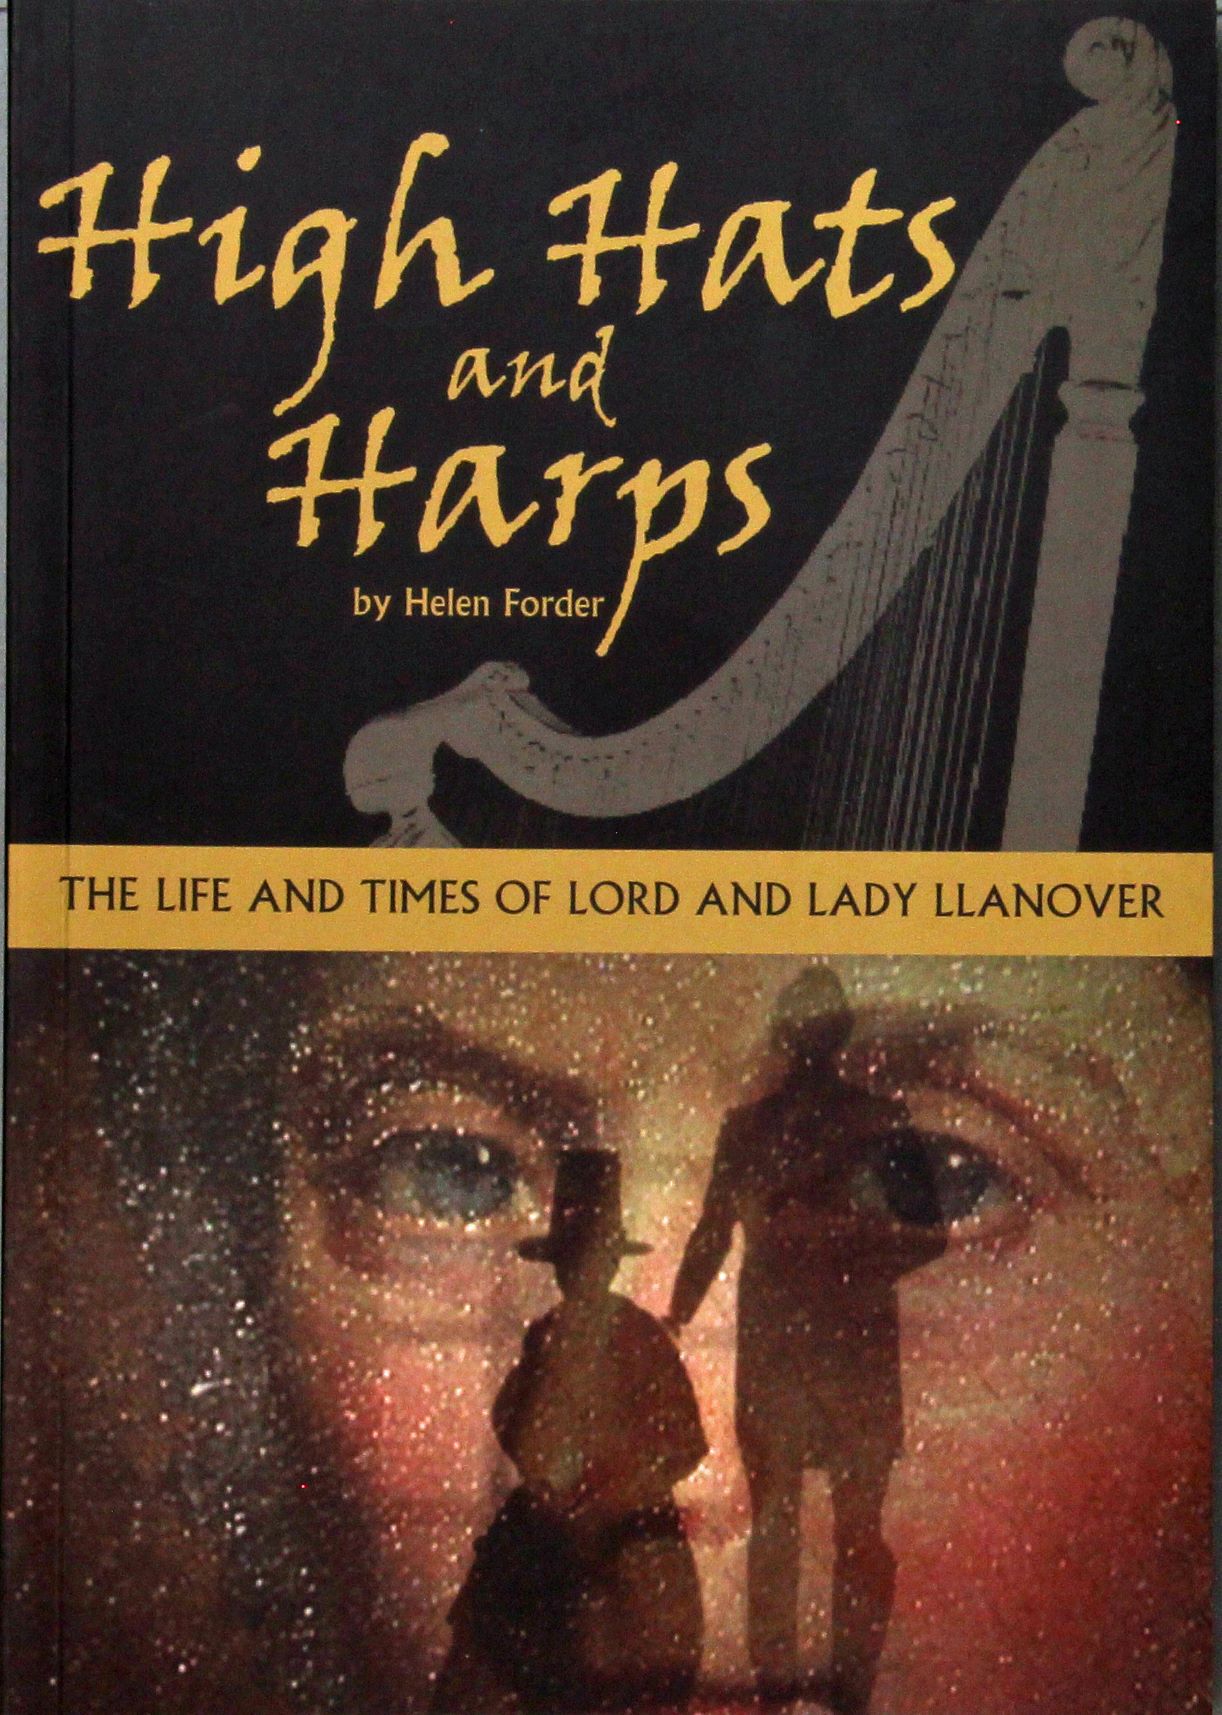 High Hats and Harps: The Life and Times of Lord and Lady Llanover, Helen Forder, 2012, £11.99